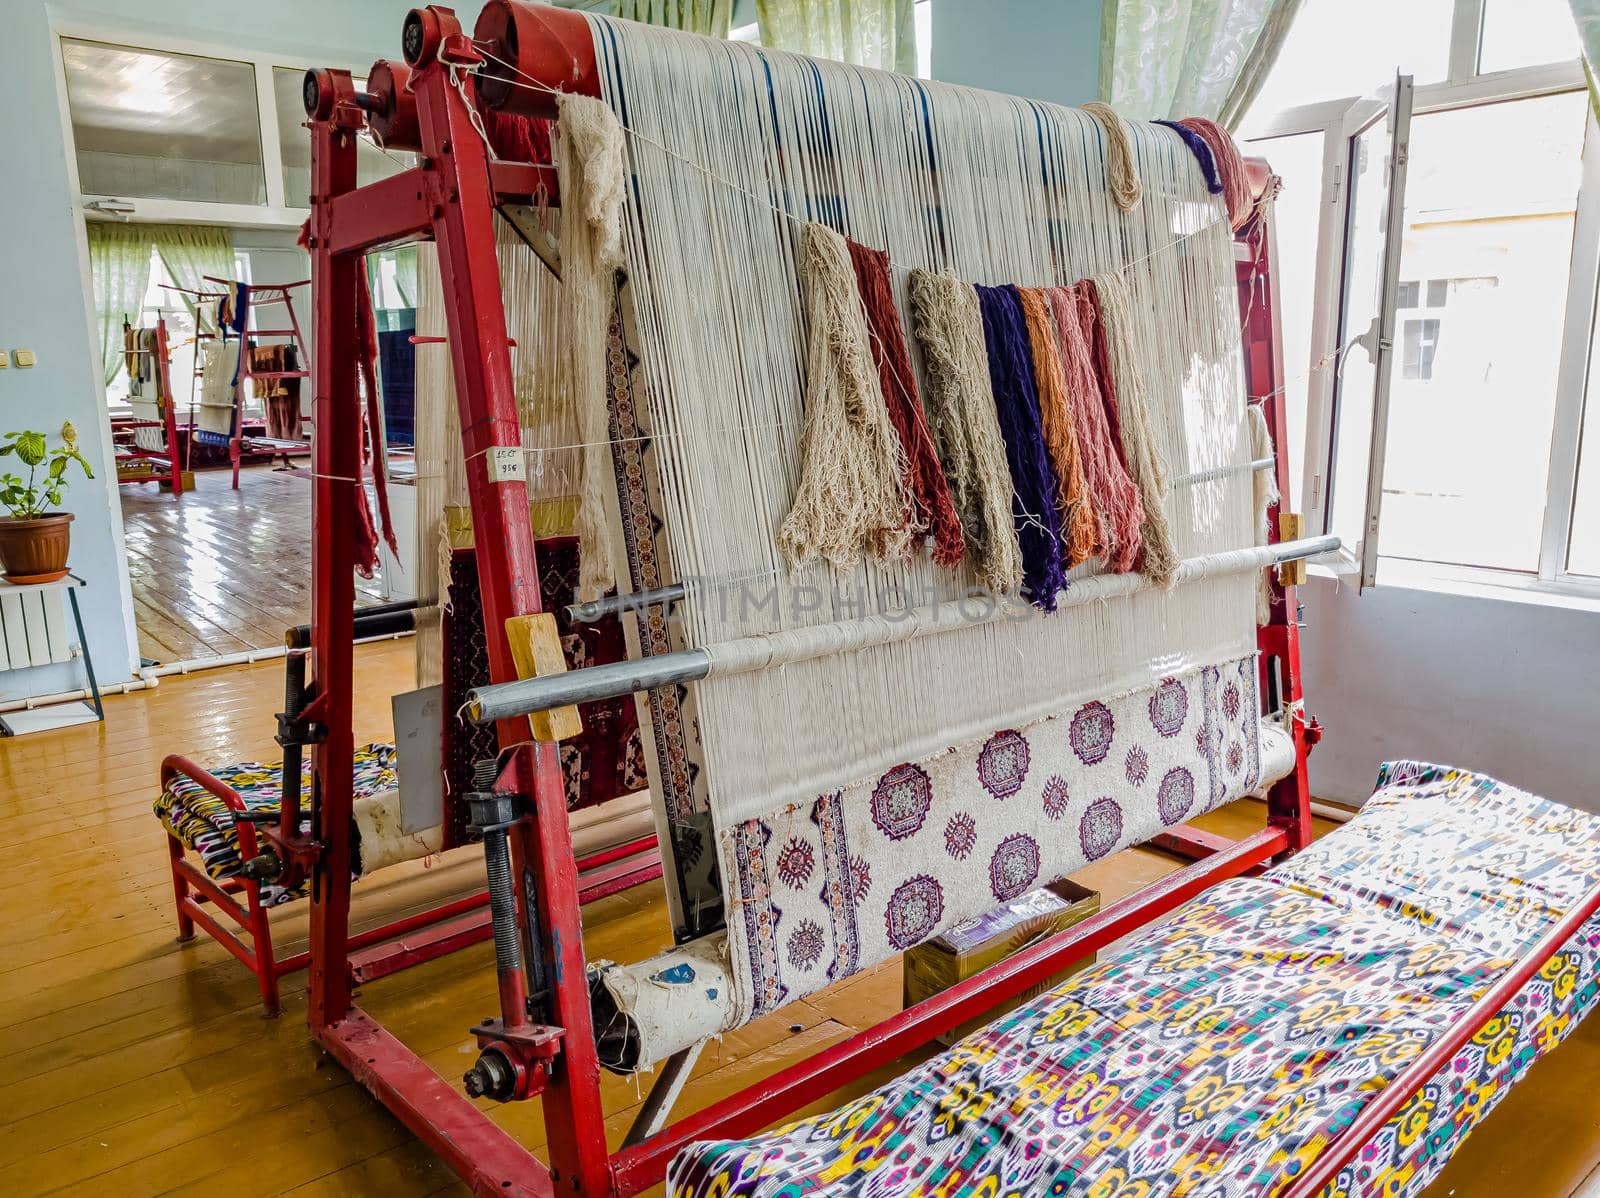 Workshop for the manual production of silk carpets in Central Asia. Uzbekistan.